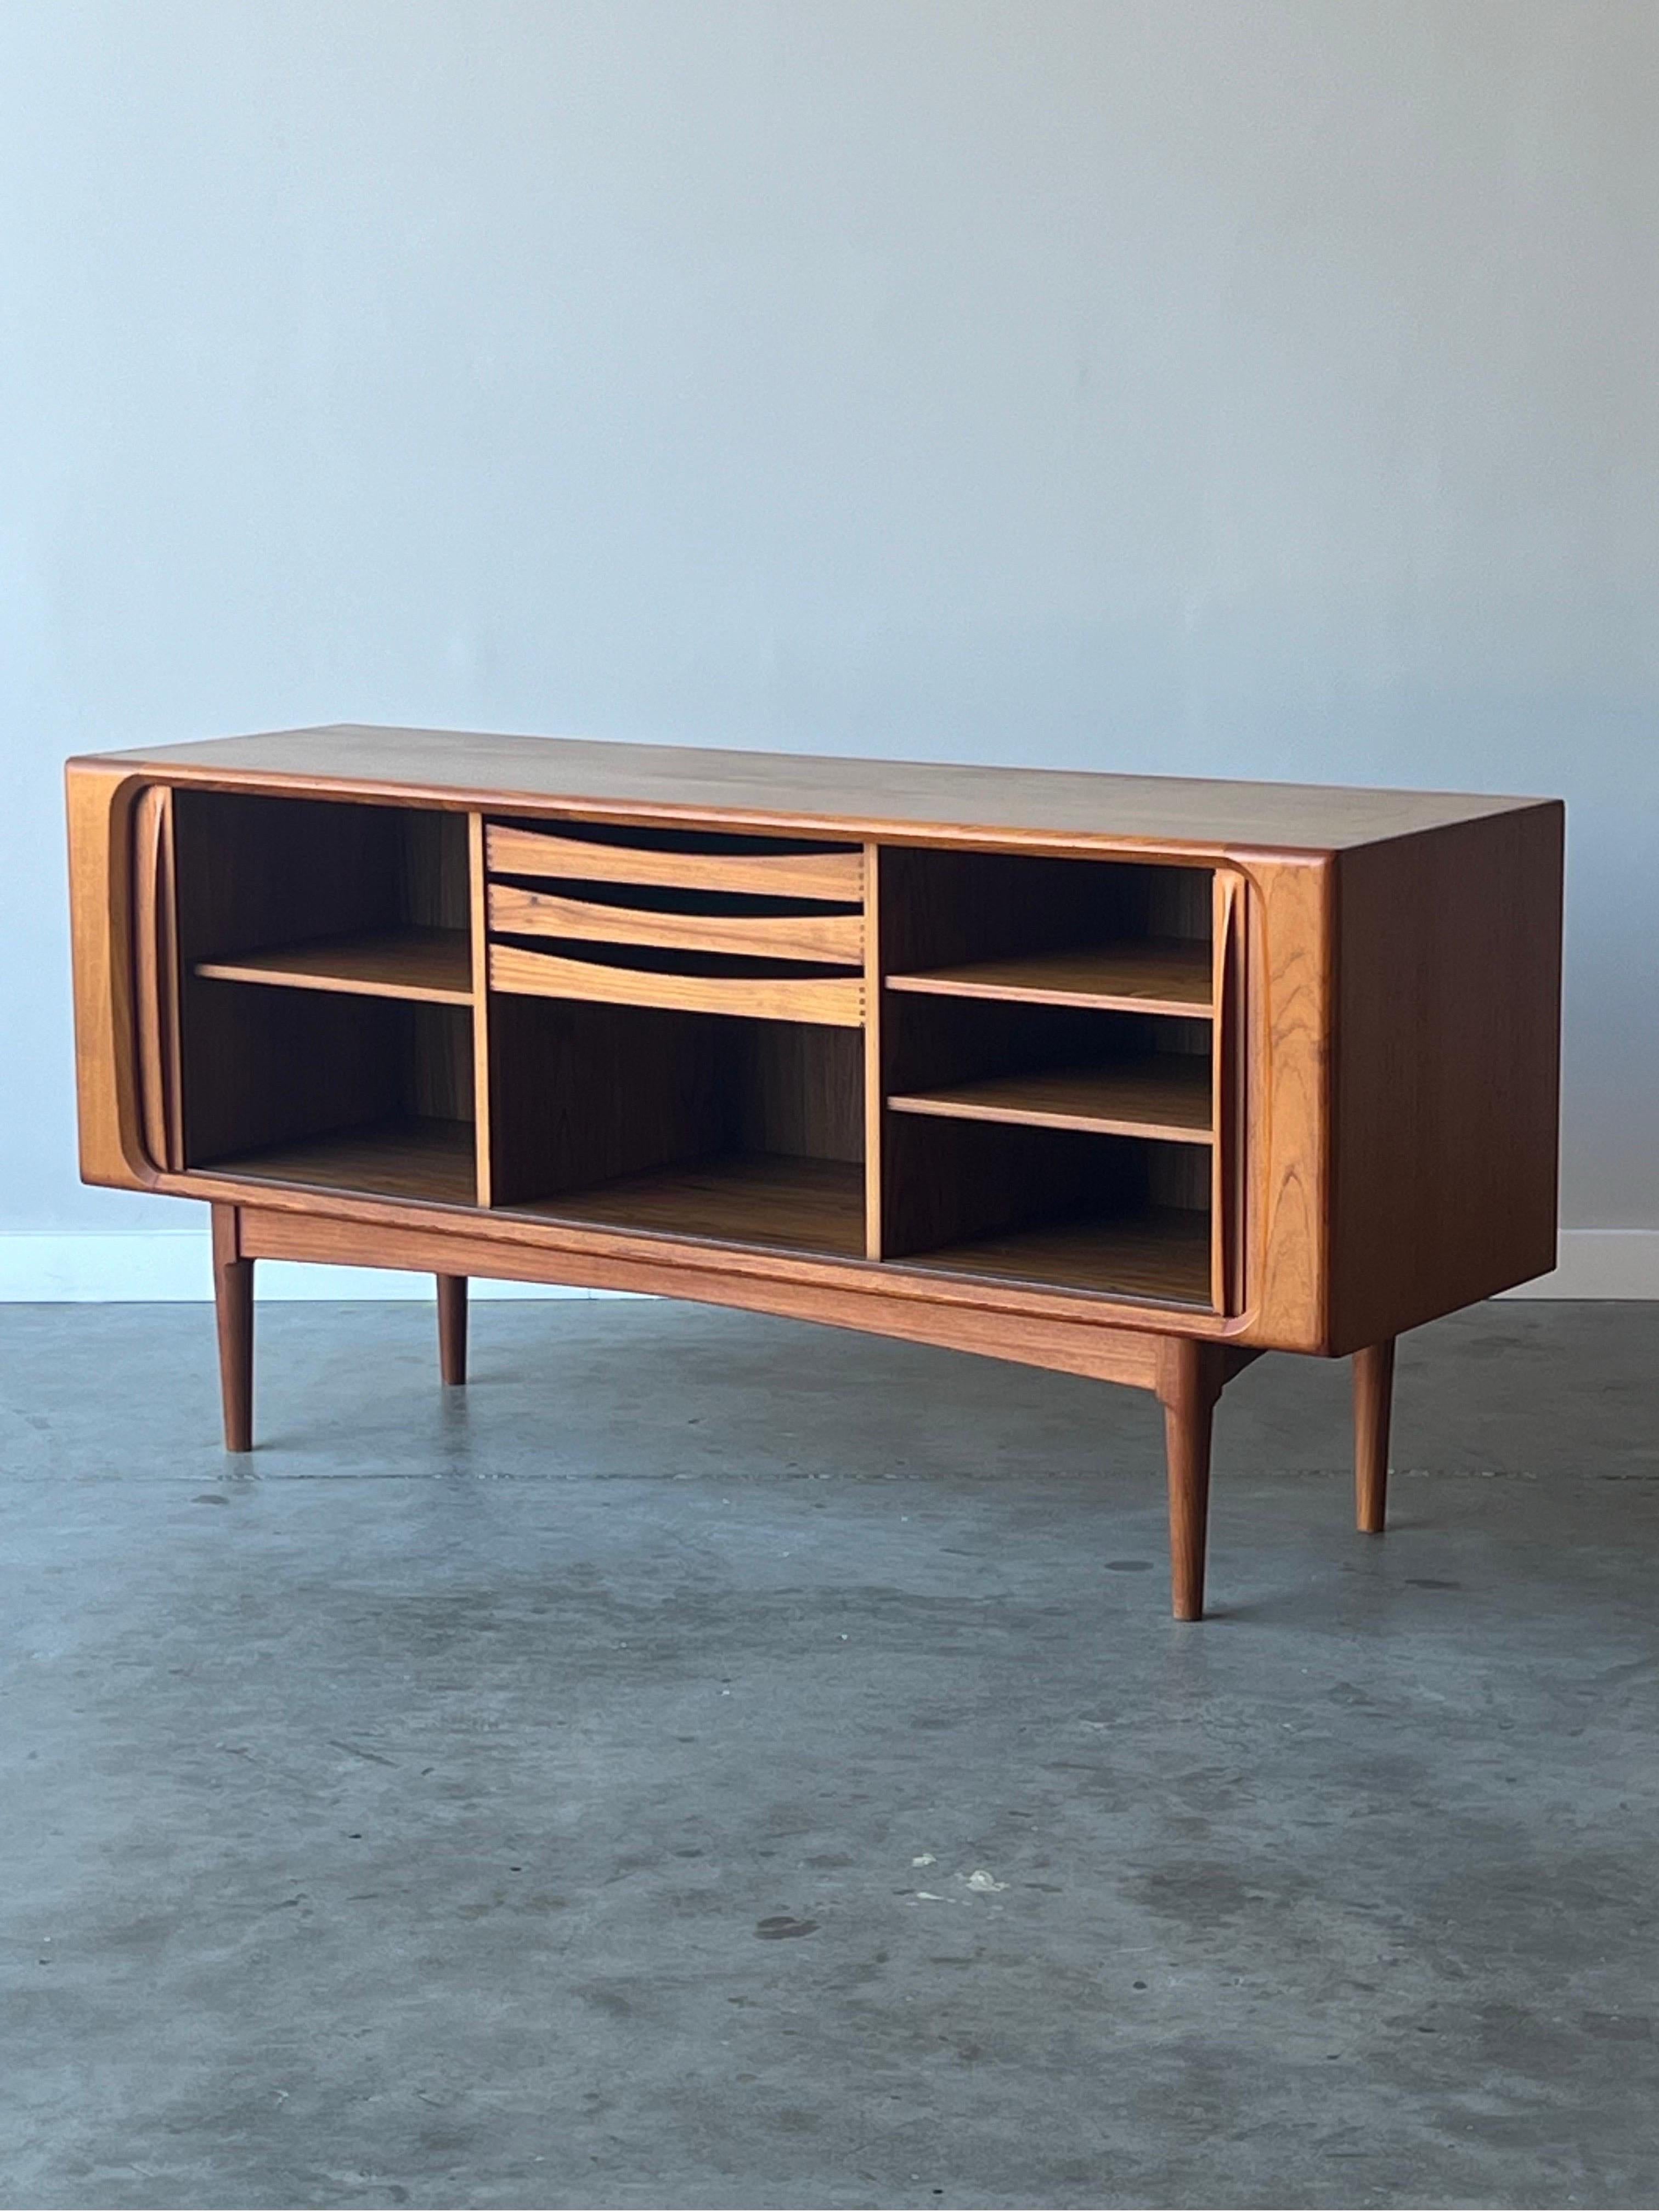 Mid-century credenza designed by Bernhard Pedersen and Son, Denmark. This 1970s credenza is made from teak and features two tambour doors and beautifully sculpted handles. The doors slide smoothly and with ease. Inside the credenza, there are three